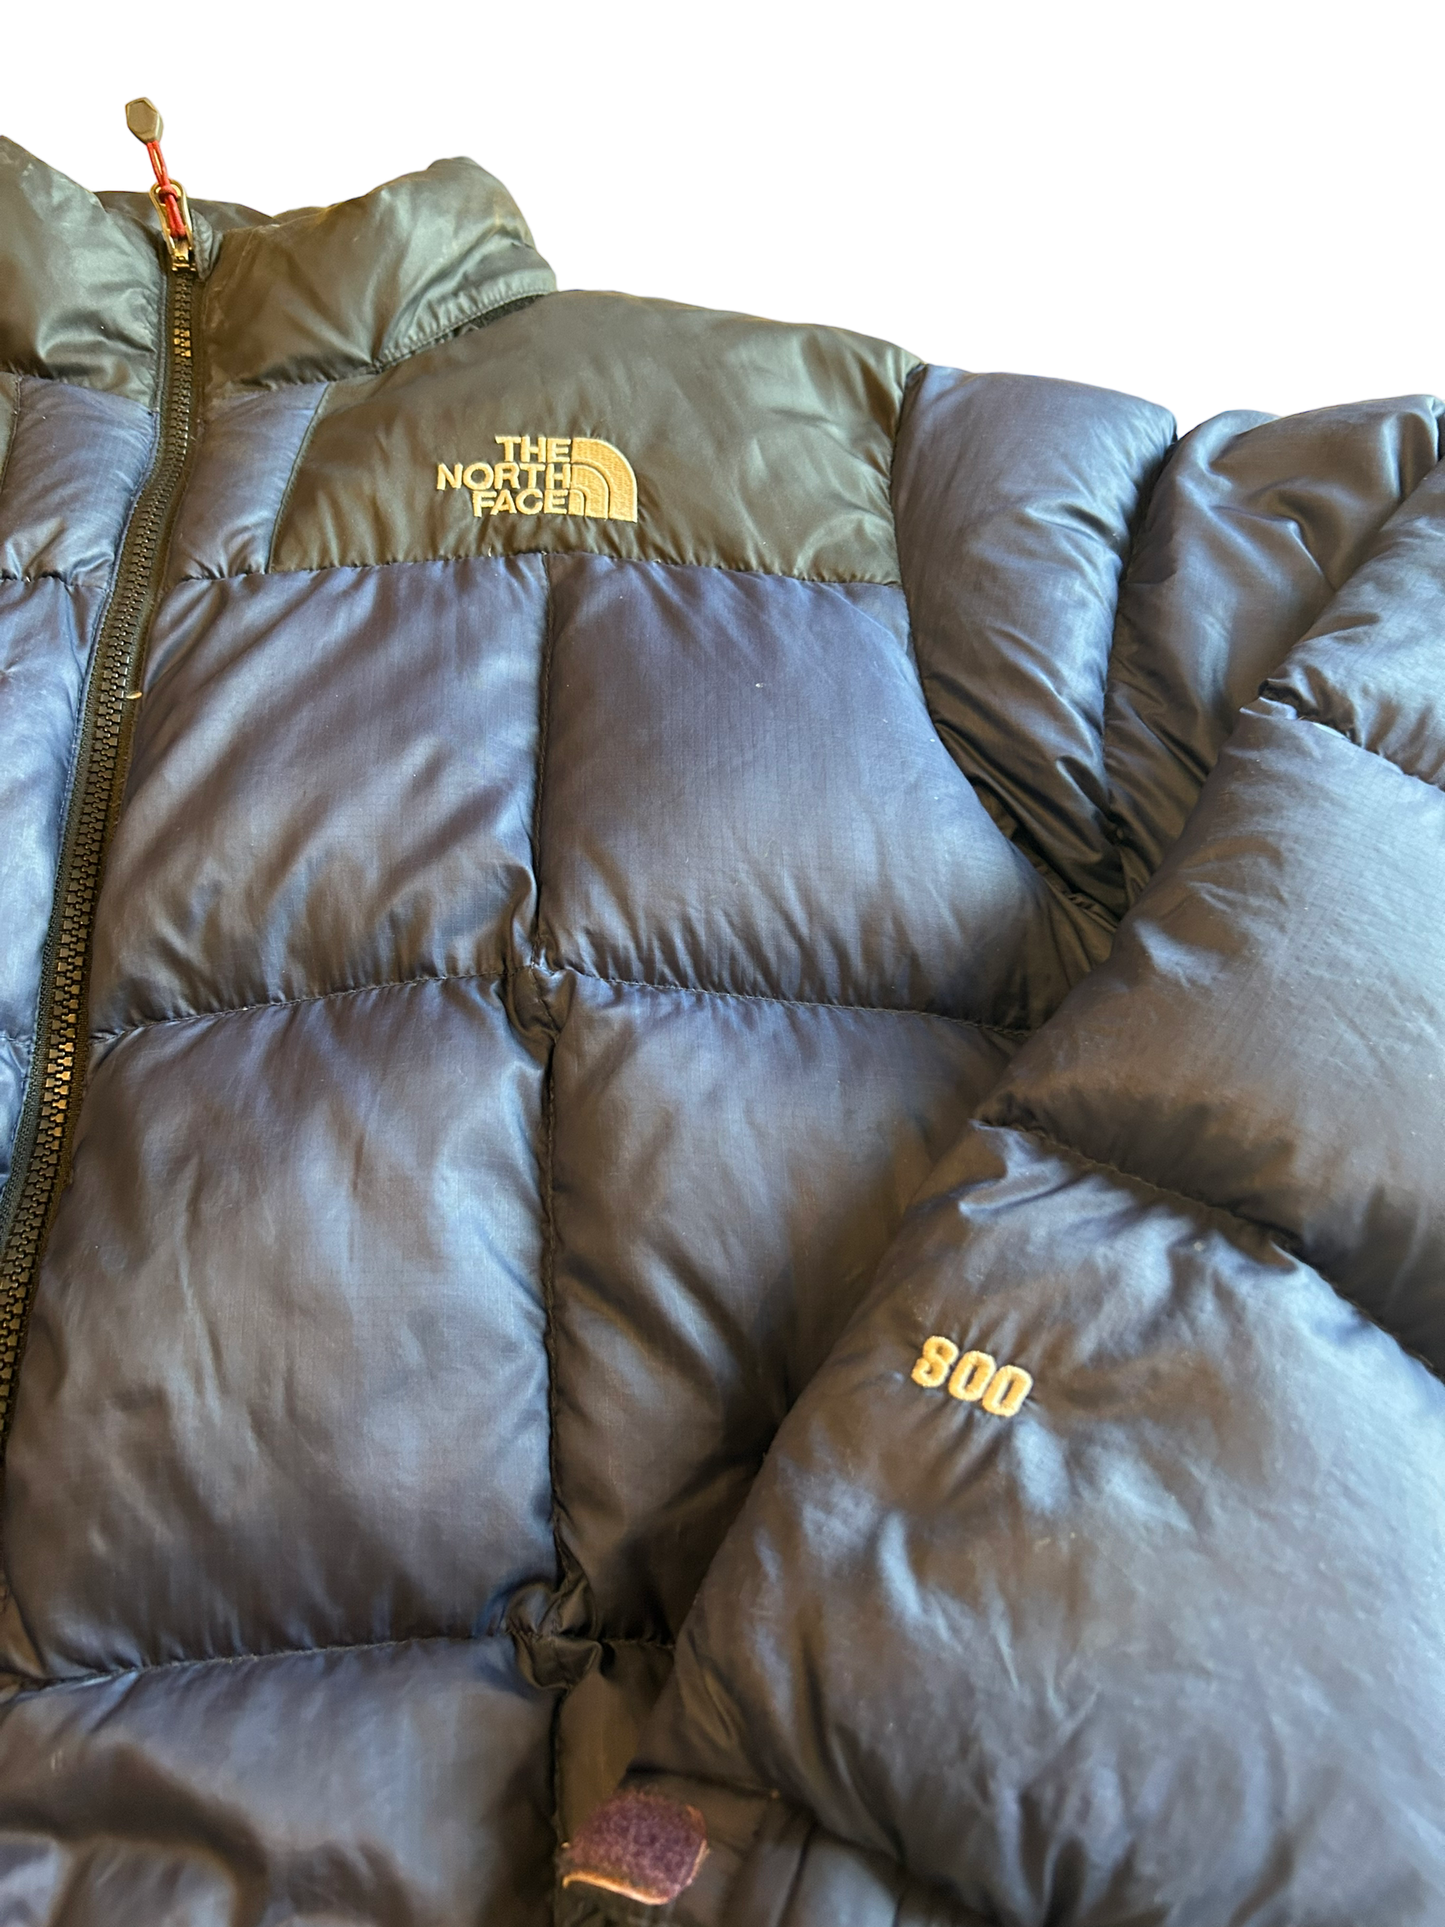 The North Face Navy Nuptse 800 Puffer